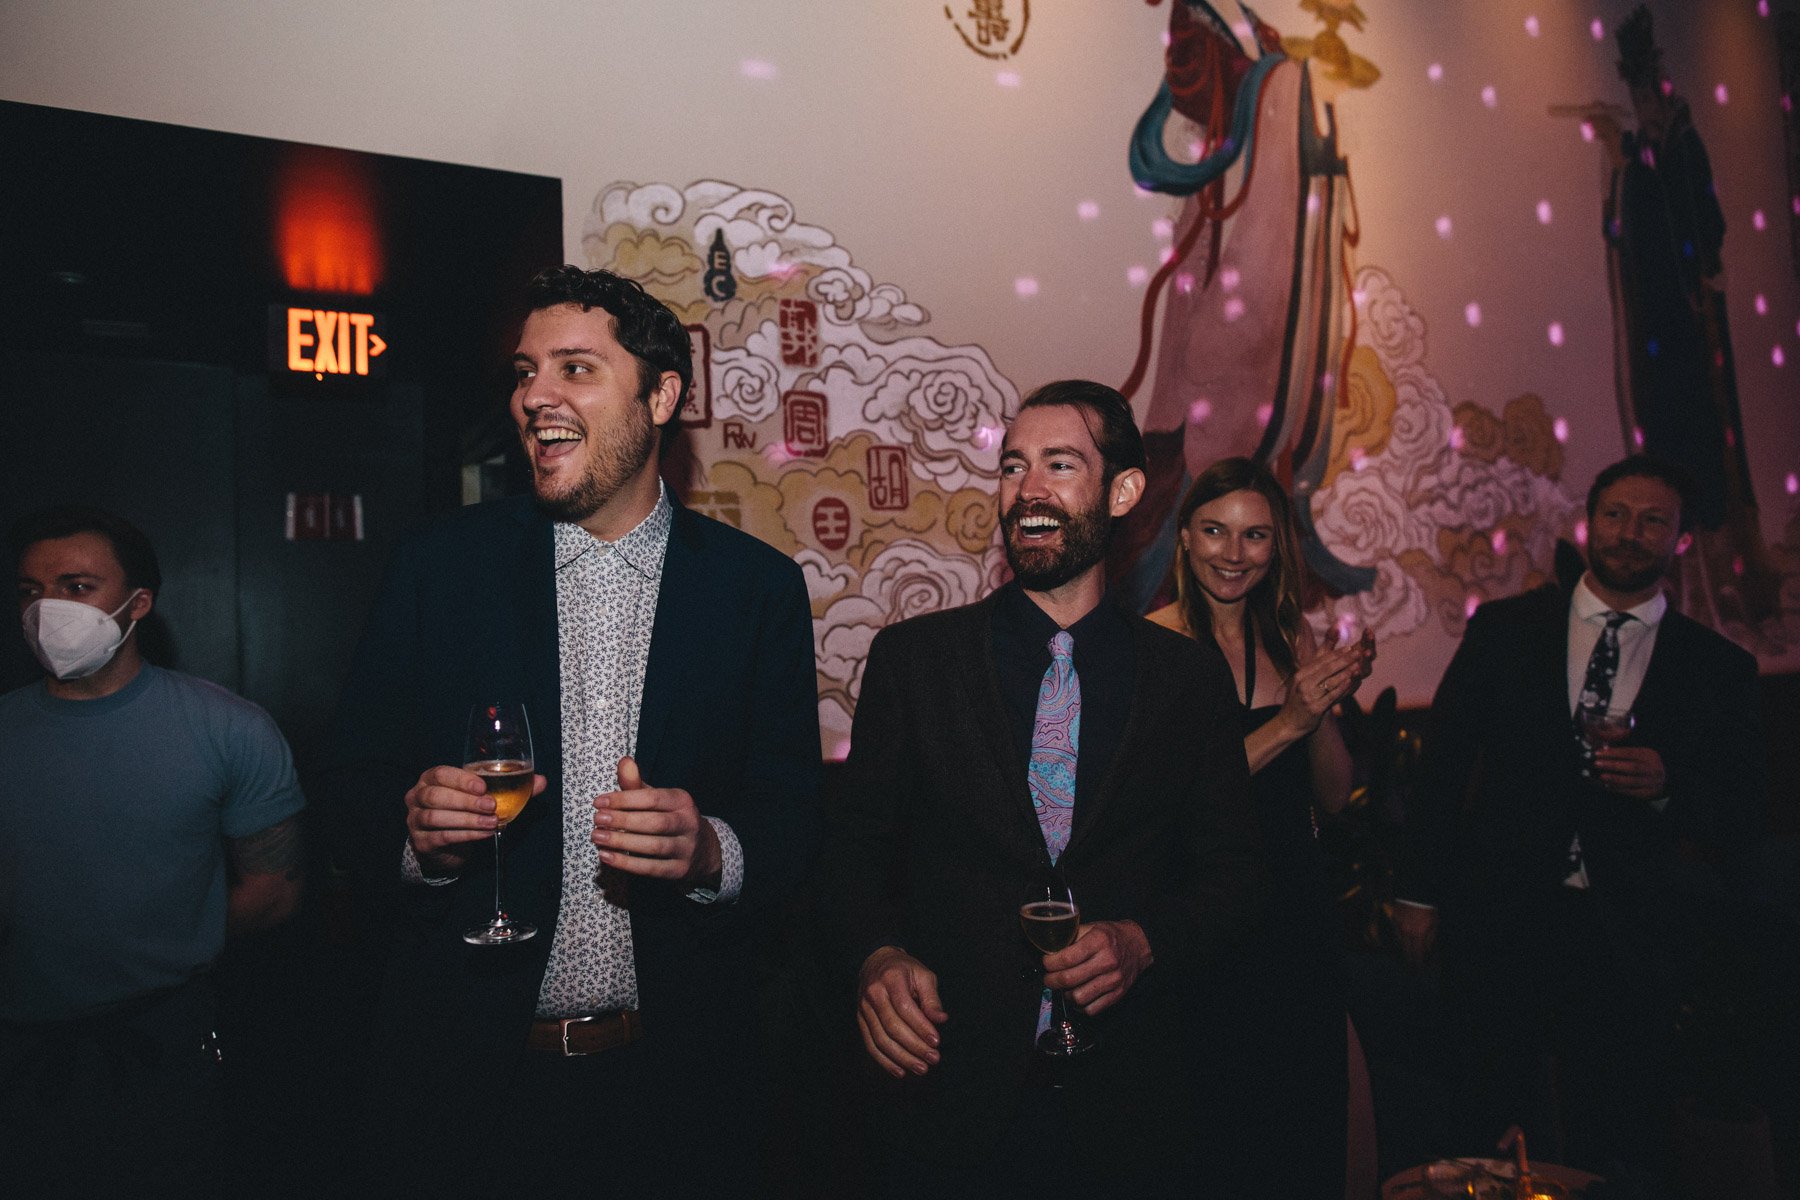 Wedding guests celebrate at Moongate Lounge